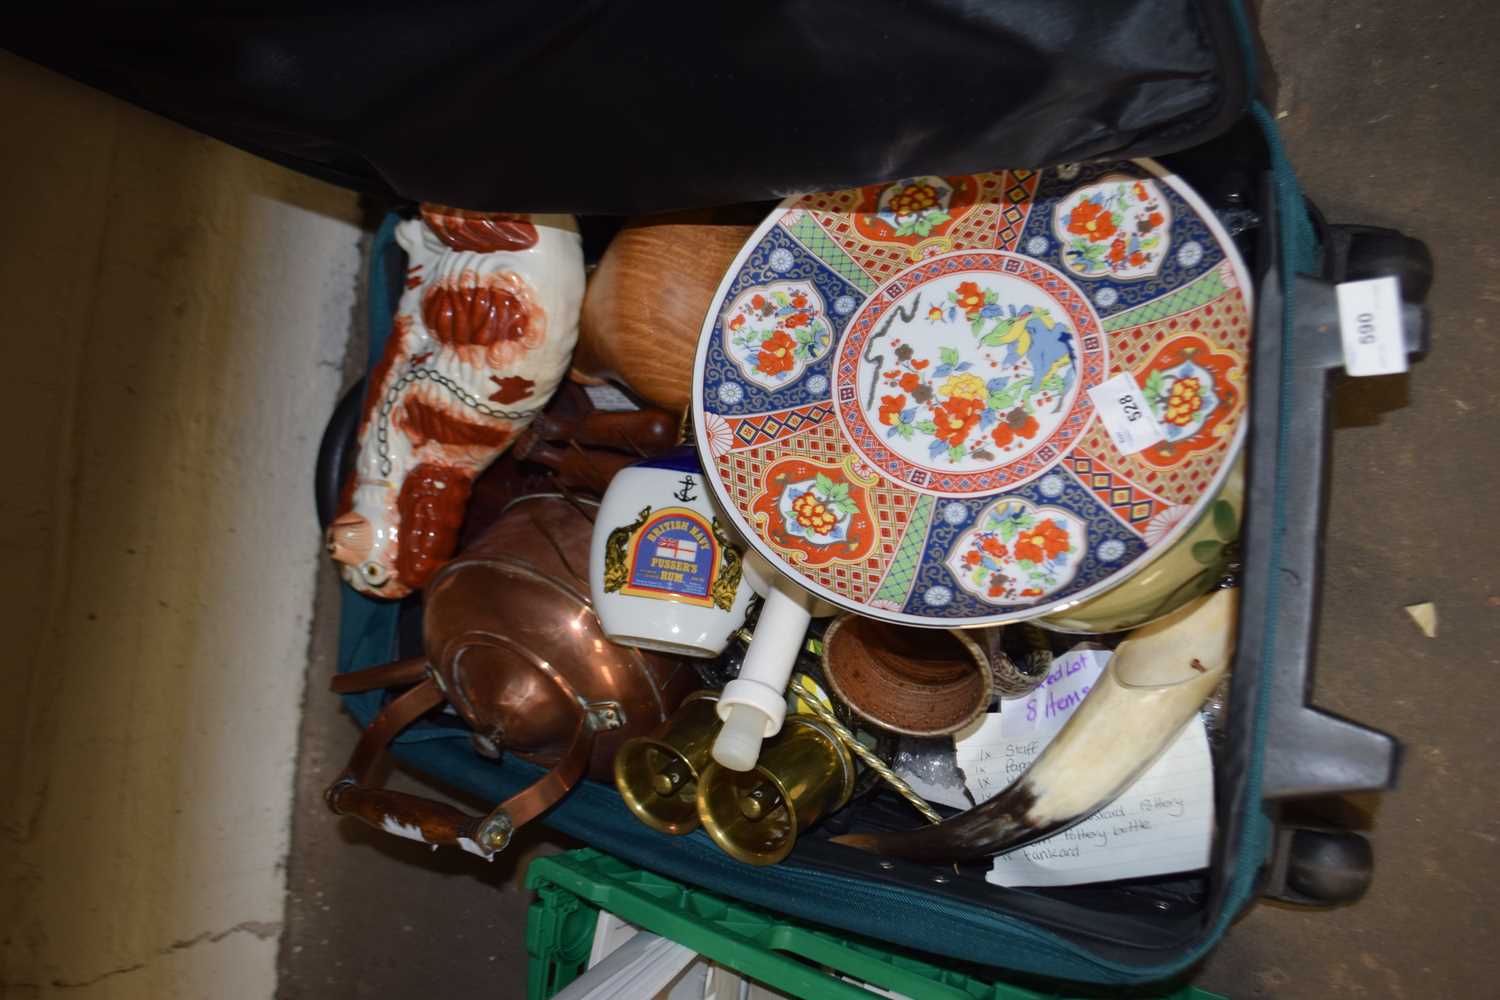 Suitcase containing mixed items to include copper kettle, Staffordshire model dog and other assorted